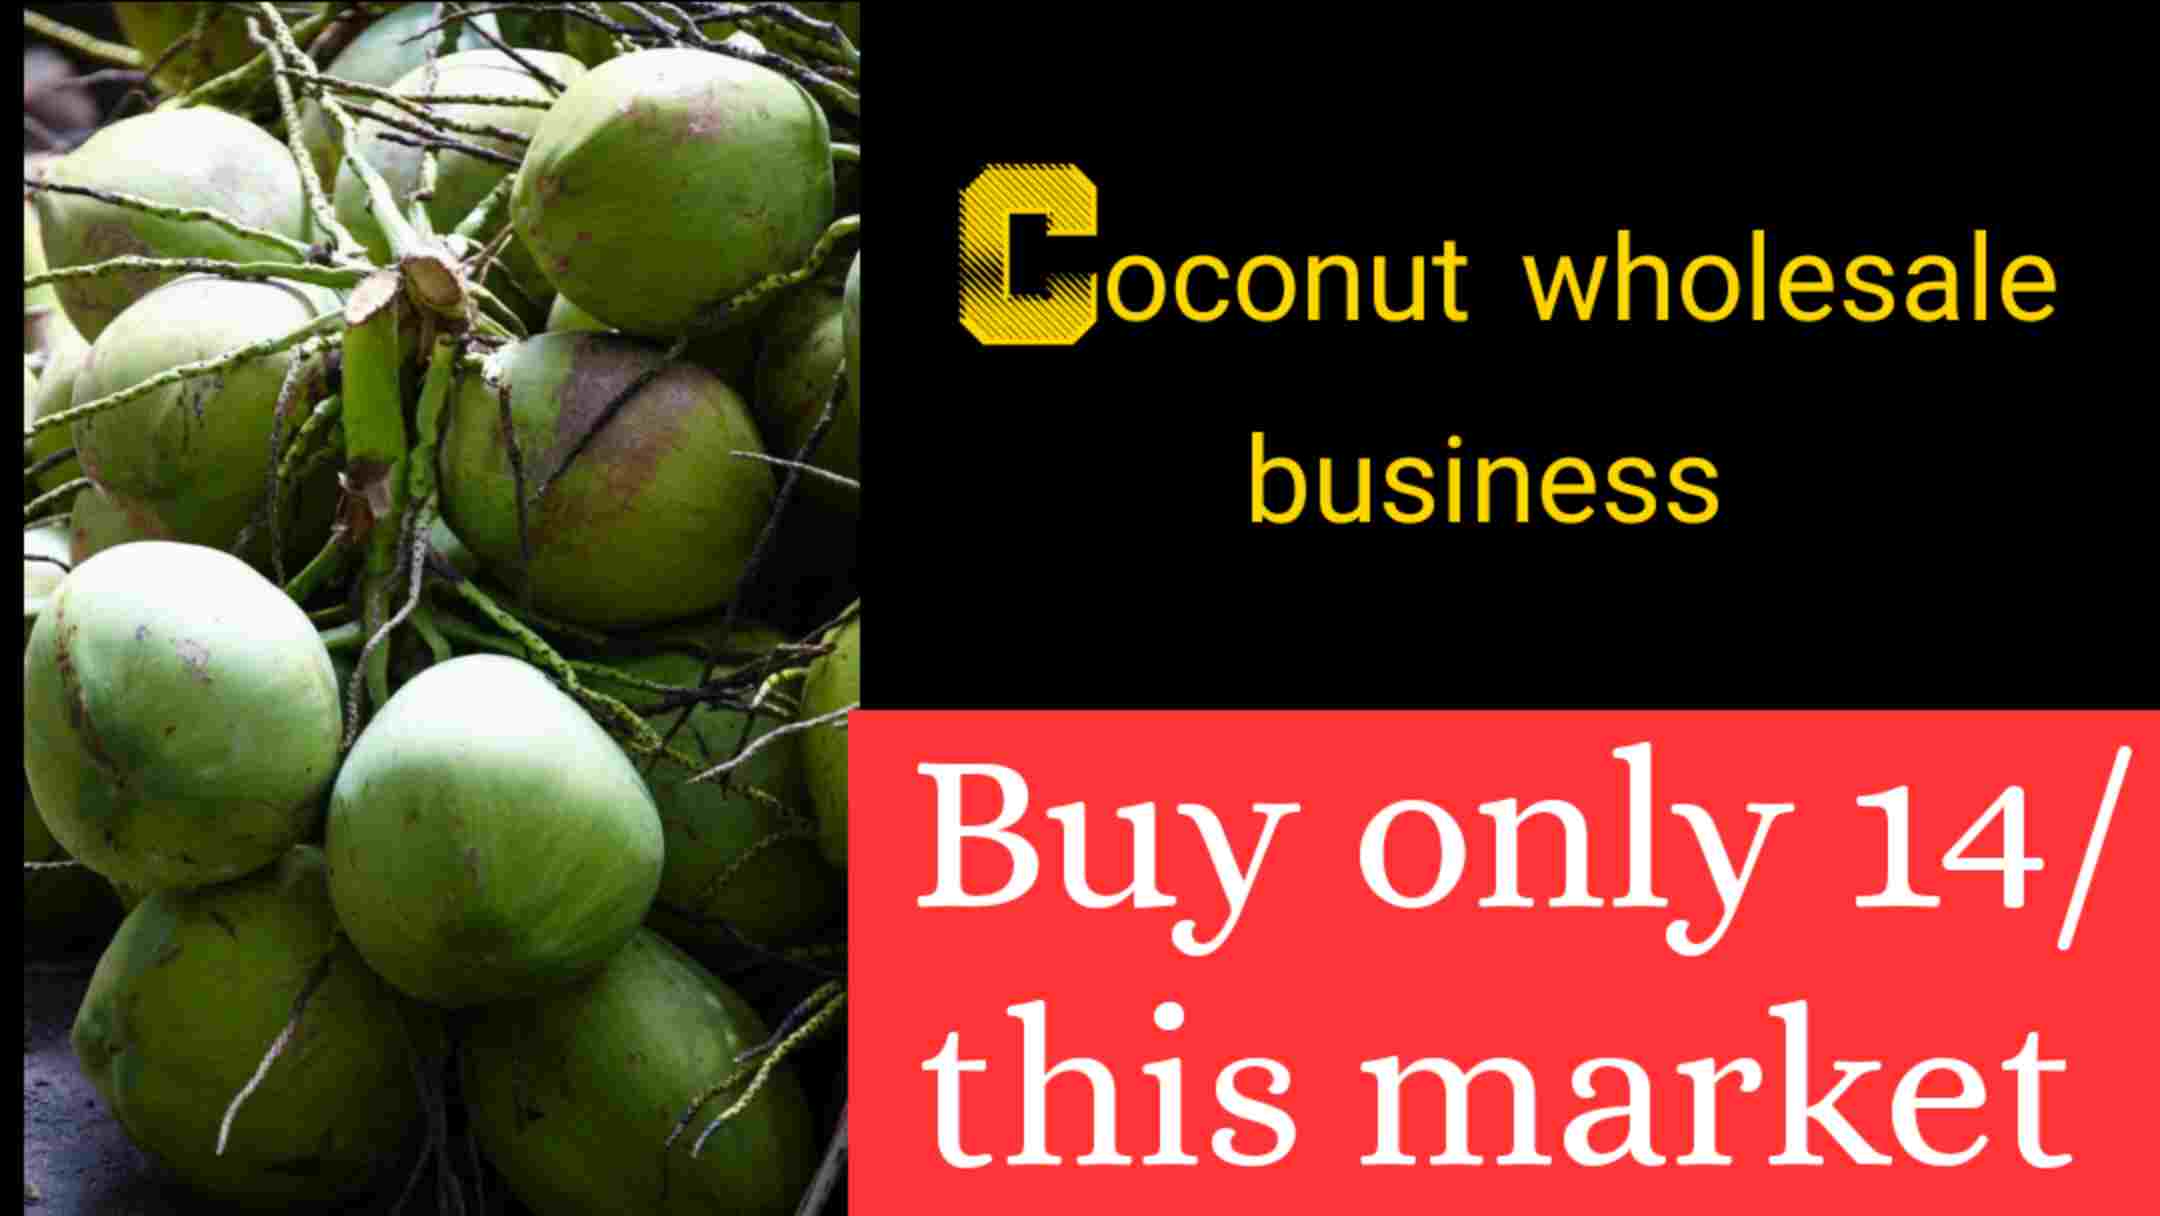 How To Start Coconut Wholesale Business? Nariyal wholesale business/